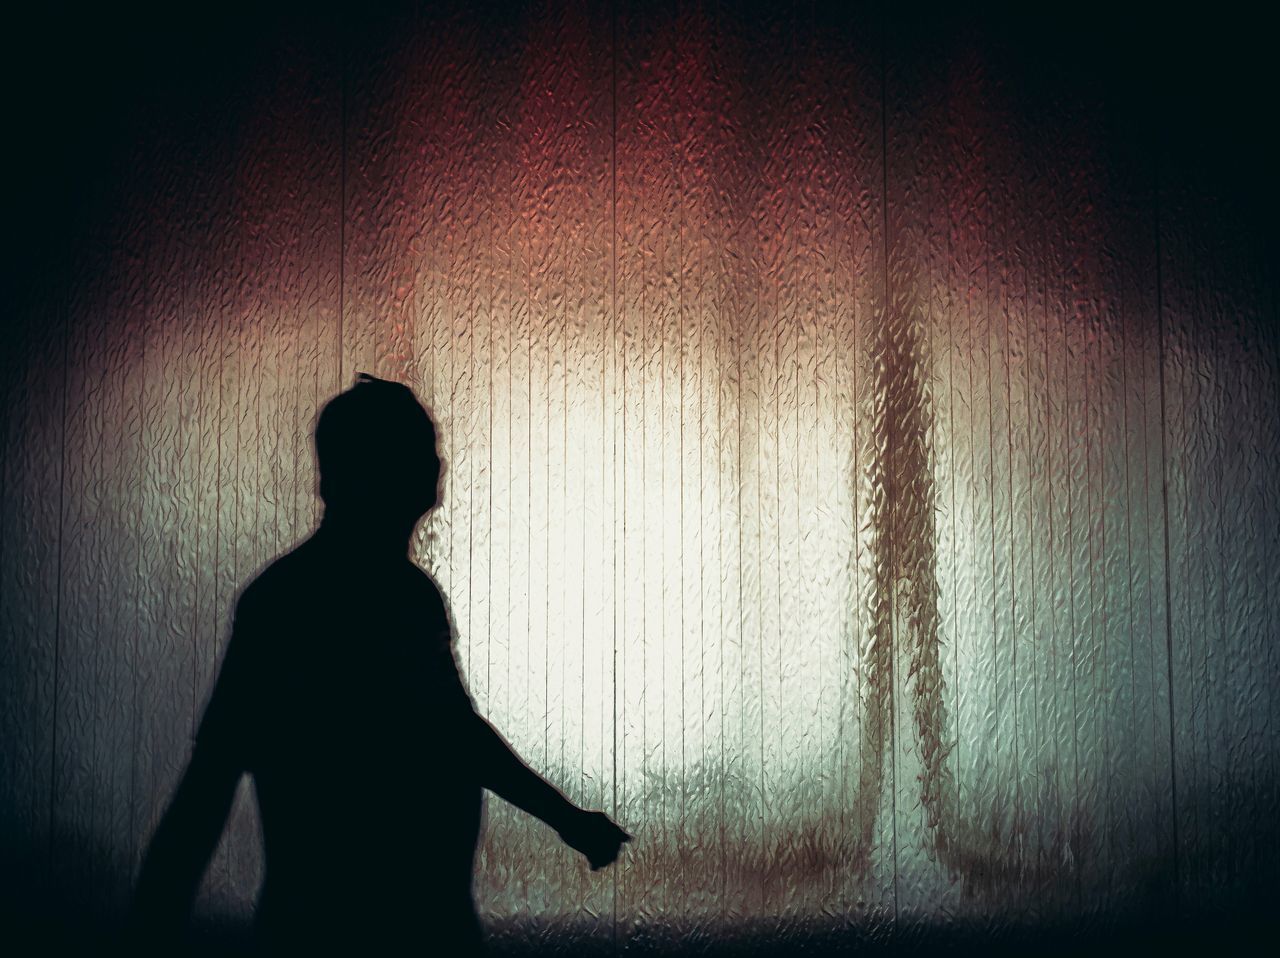 REAR VIEW OF SILHOUETTE WOMAN STANDING AGAINST CURTAIN